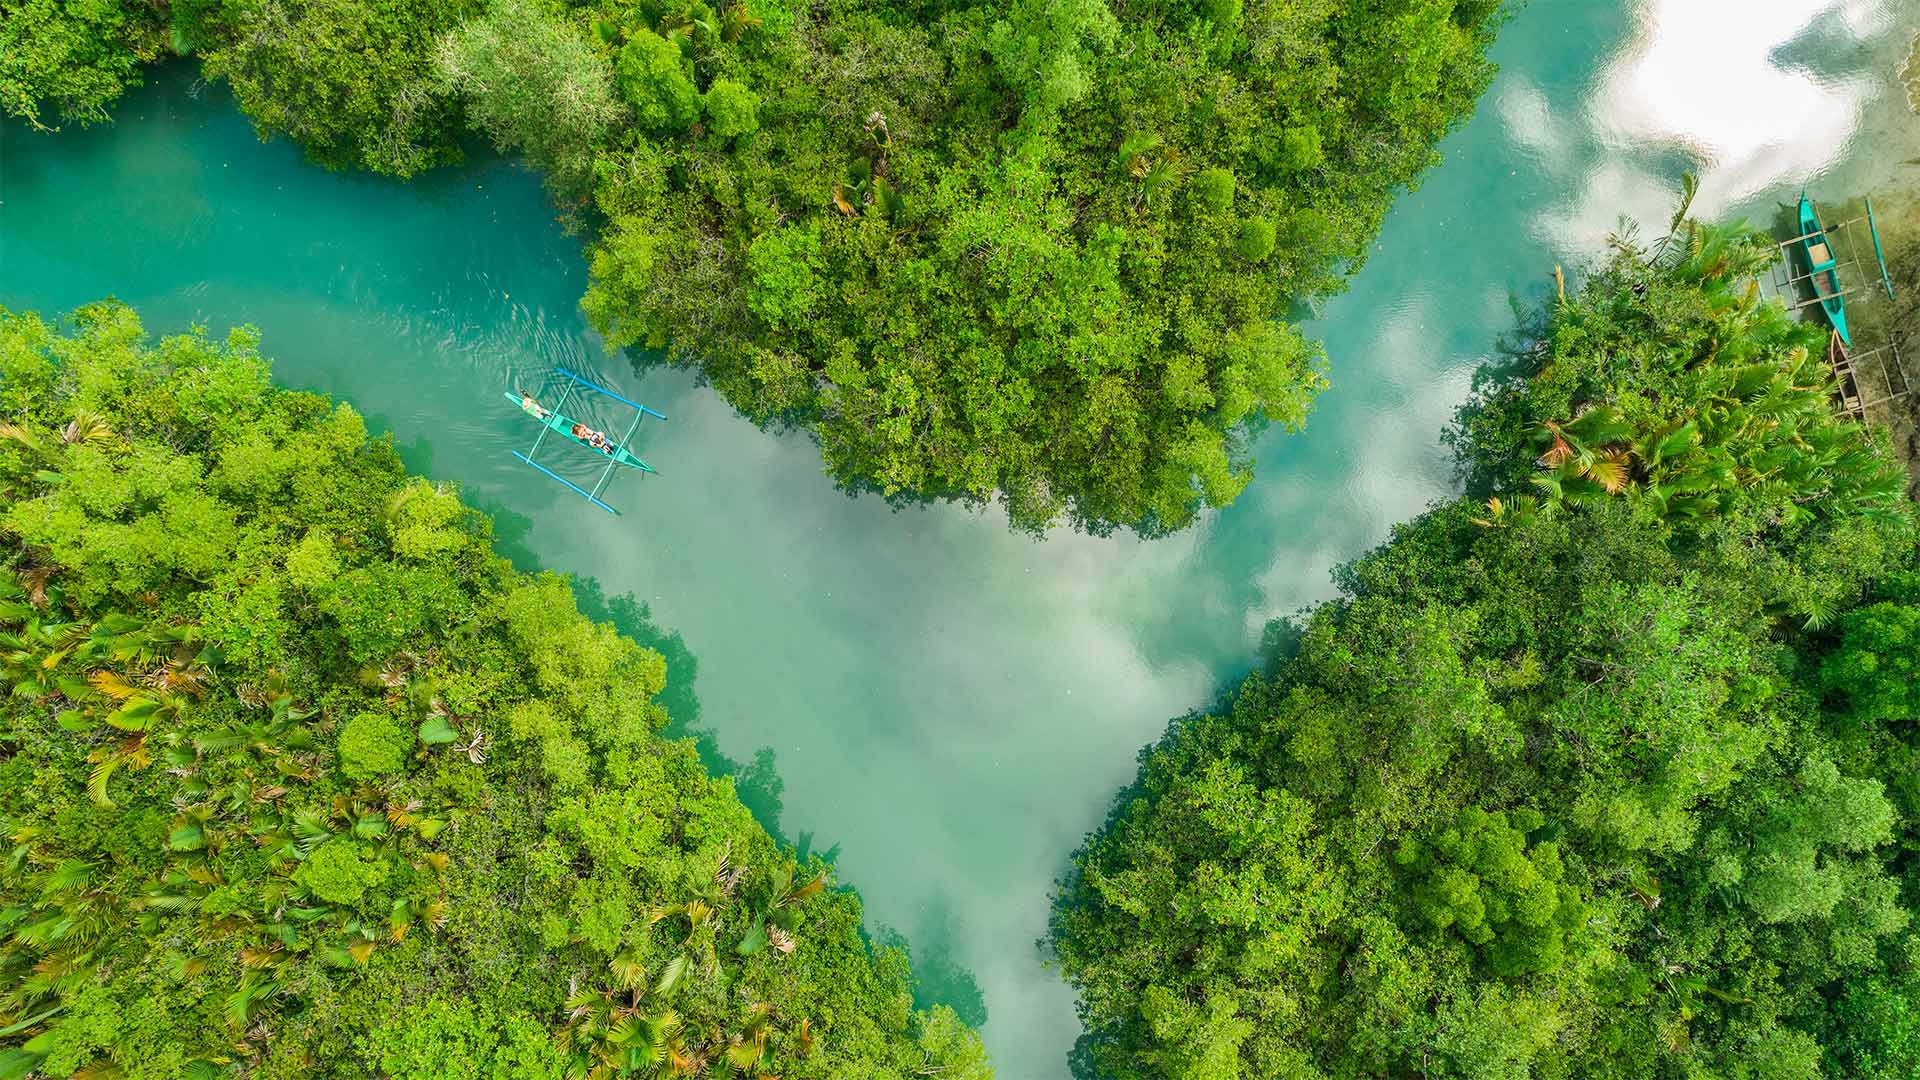 The Bojo River in Cebu, Philippines - Amazing Aerial Agency/Offset by Shutterstock)